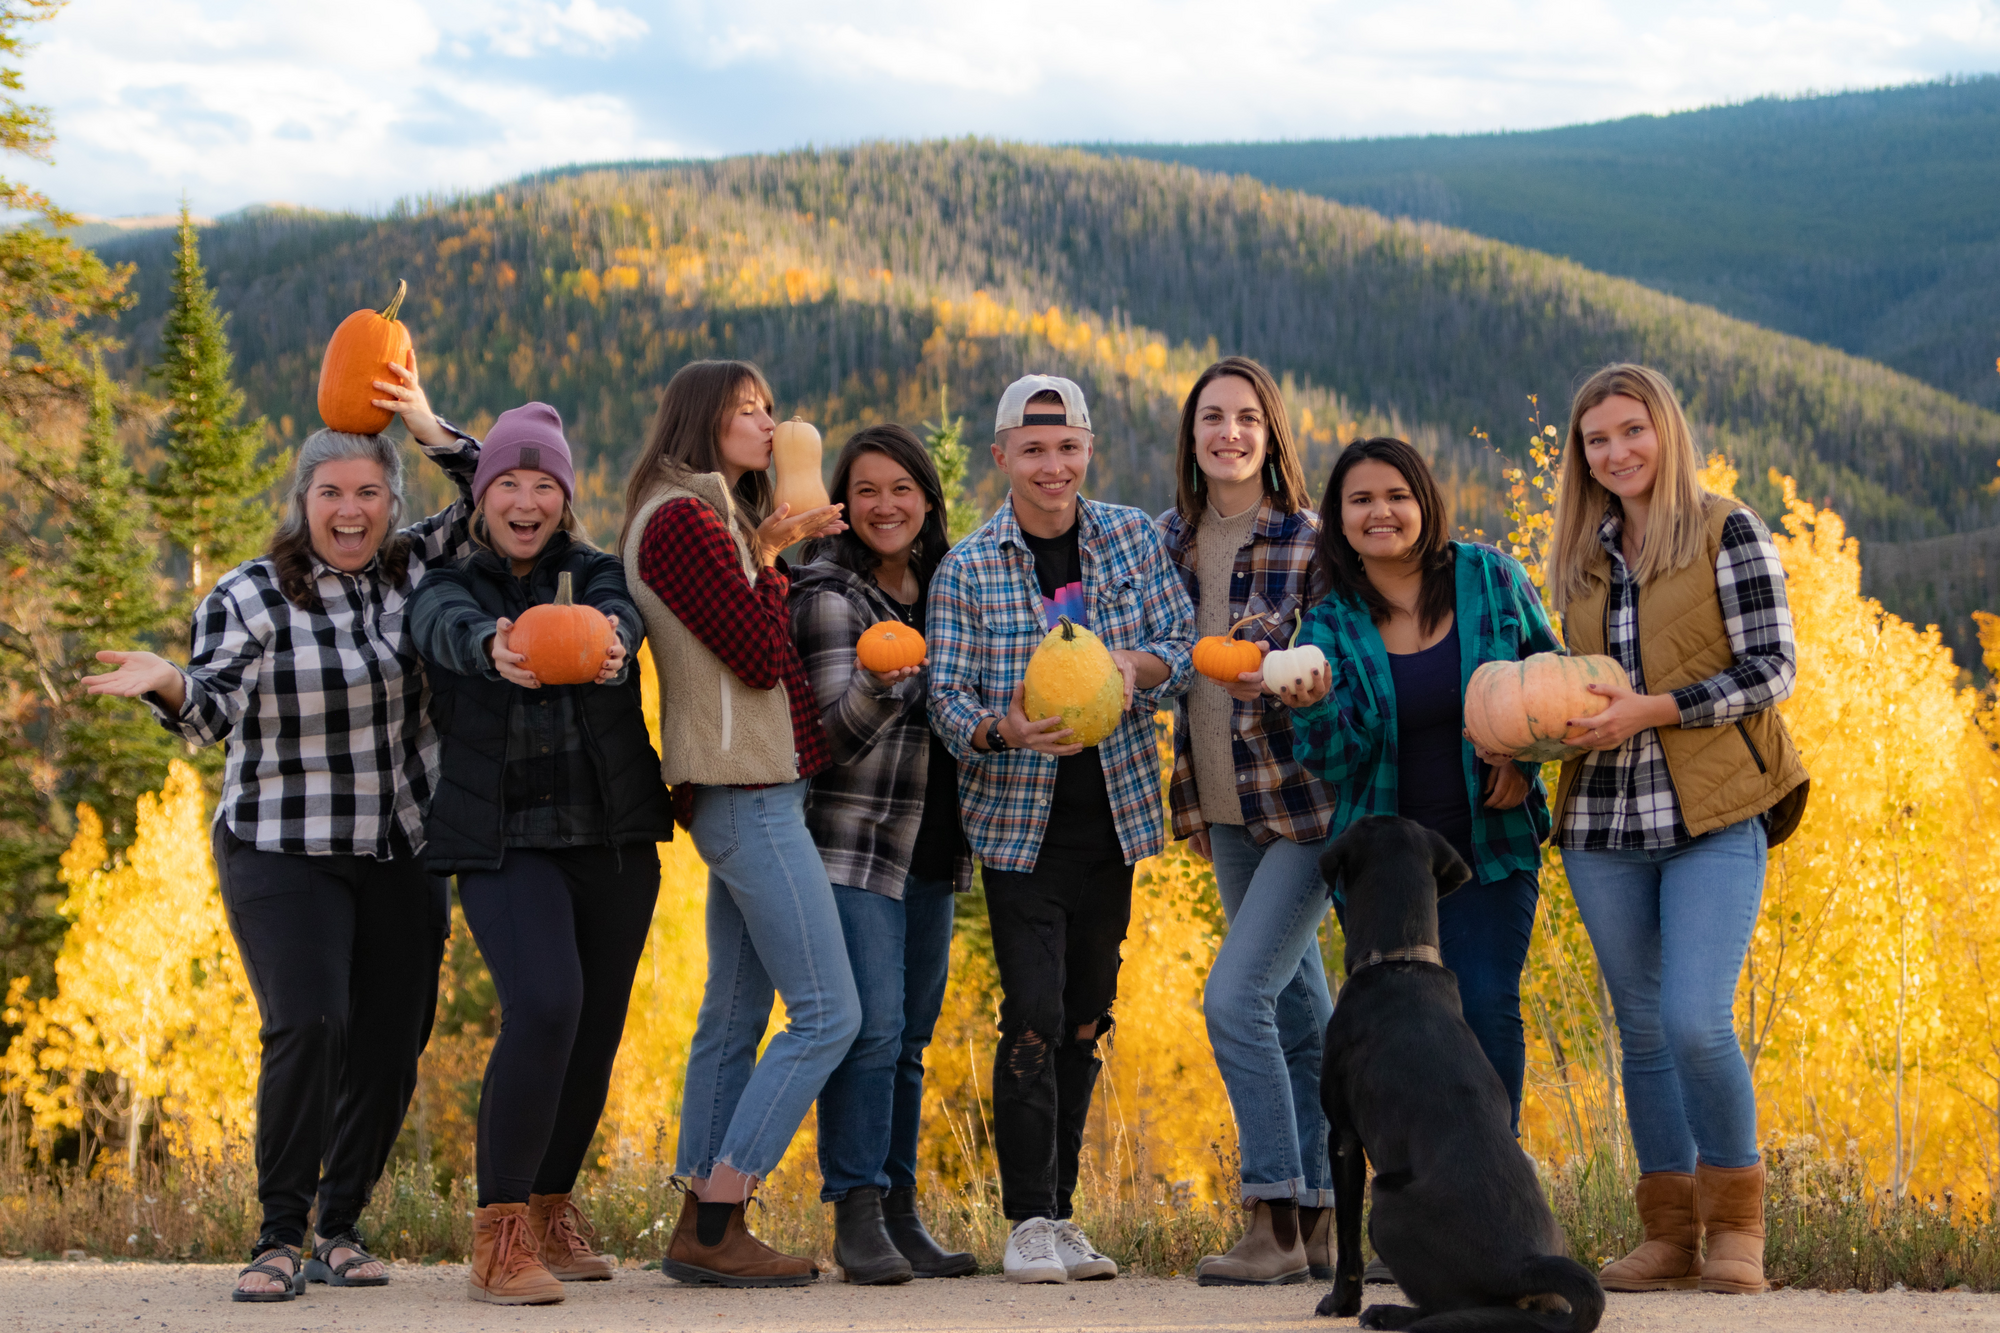 a group of people holding pumpkins posing for a photo